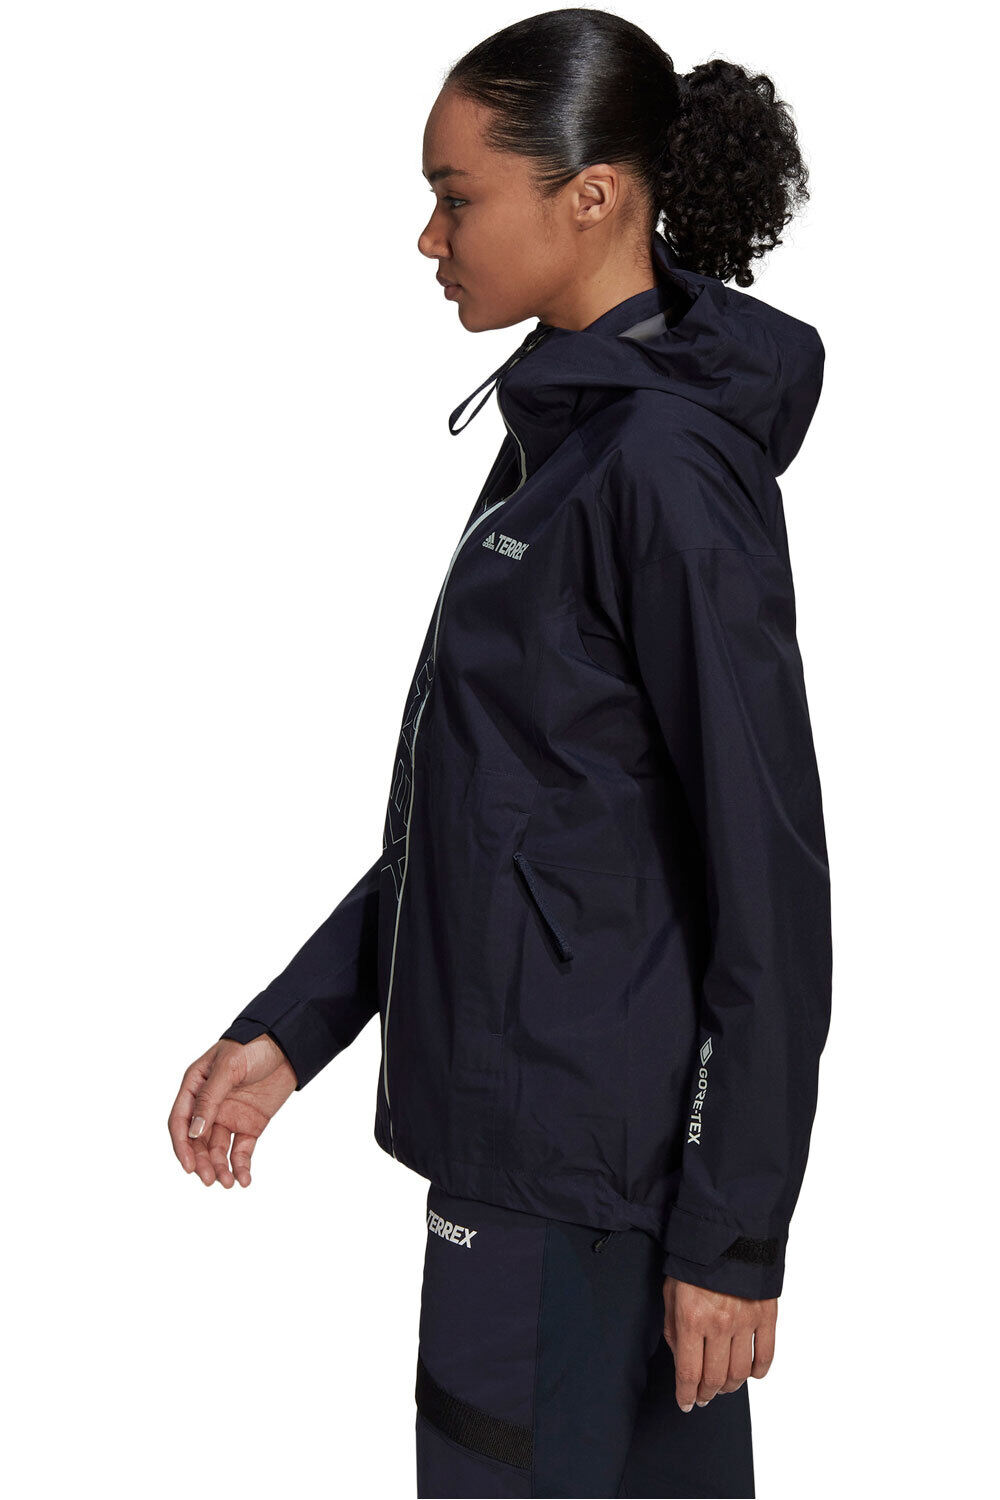 adidas chaqueta impermeable mujer Terrex GORE-TEX Paclite impermeable 05